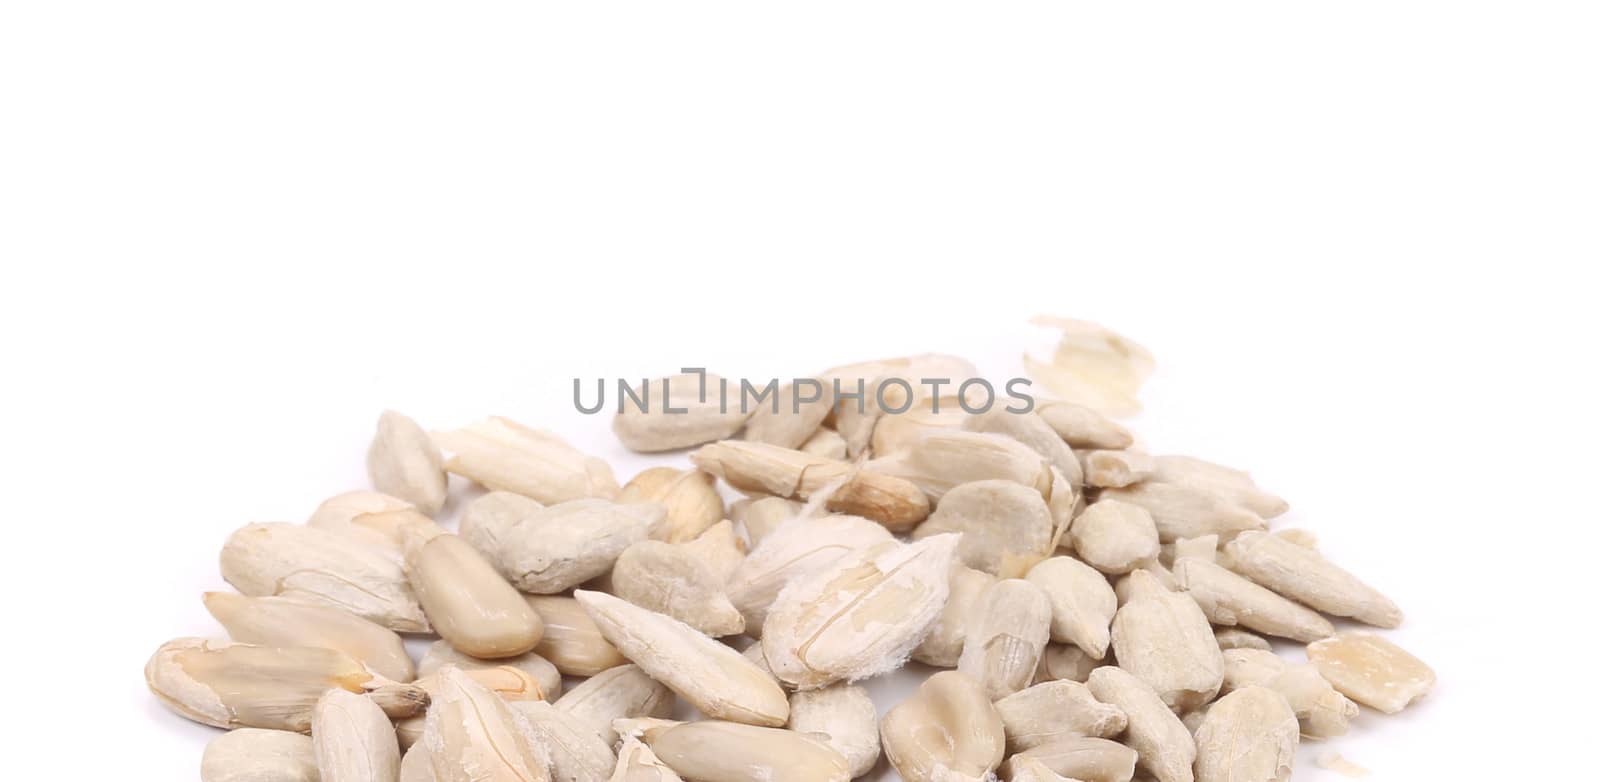 Bunch of pelled sunflower seeds. Whole background.